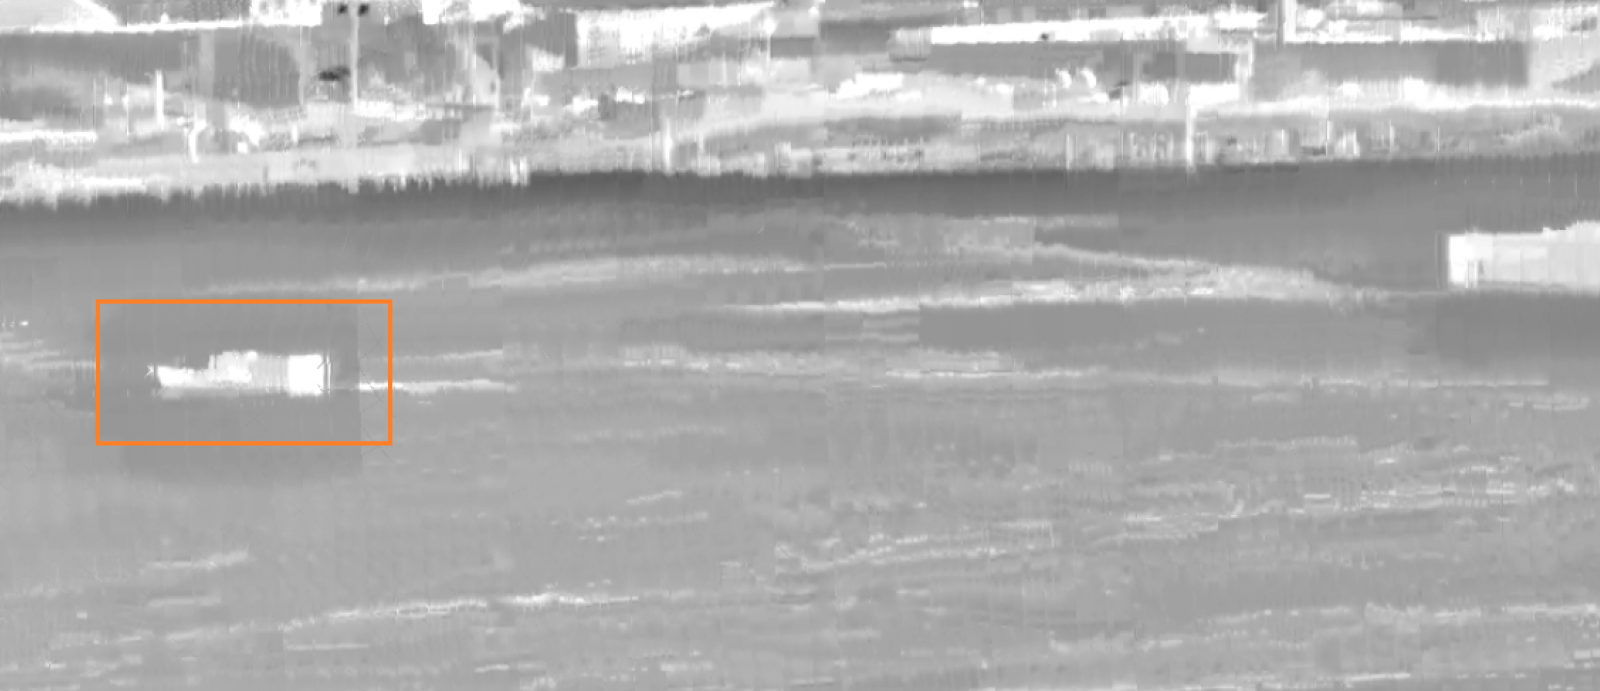 A grey-scale surveillance image of a shoreline, with a boat in the water outlined by an orange box.